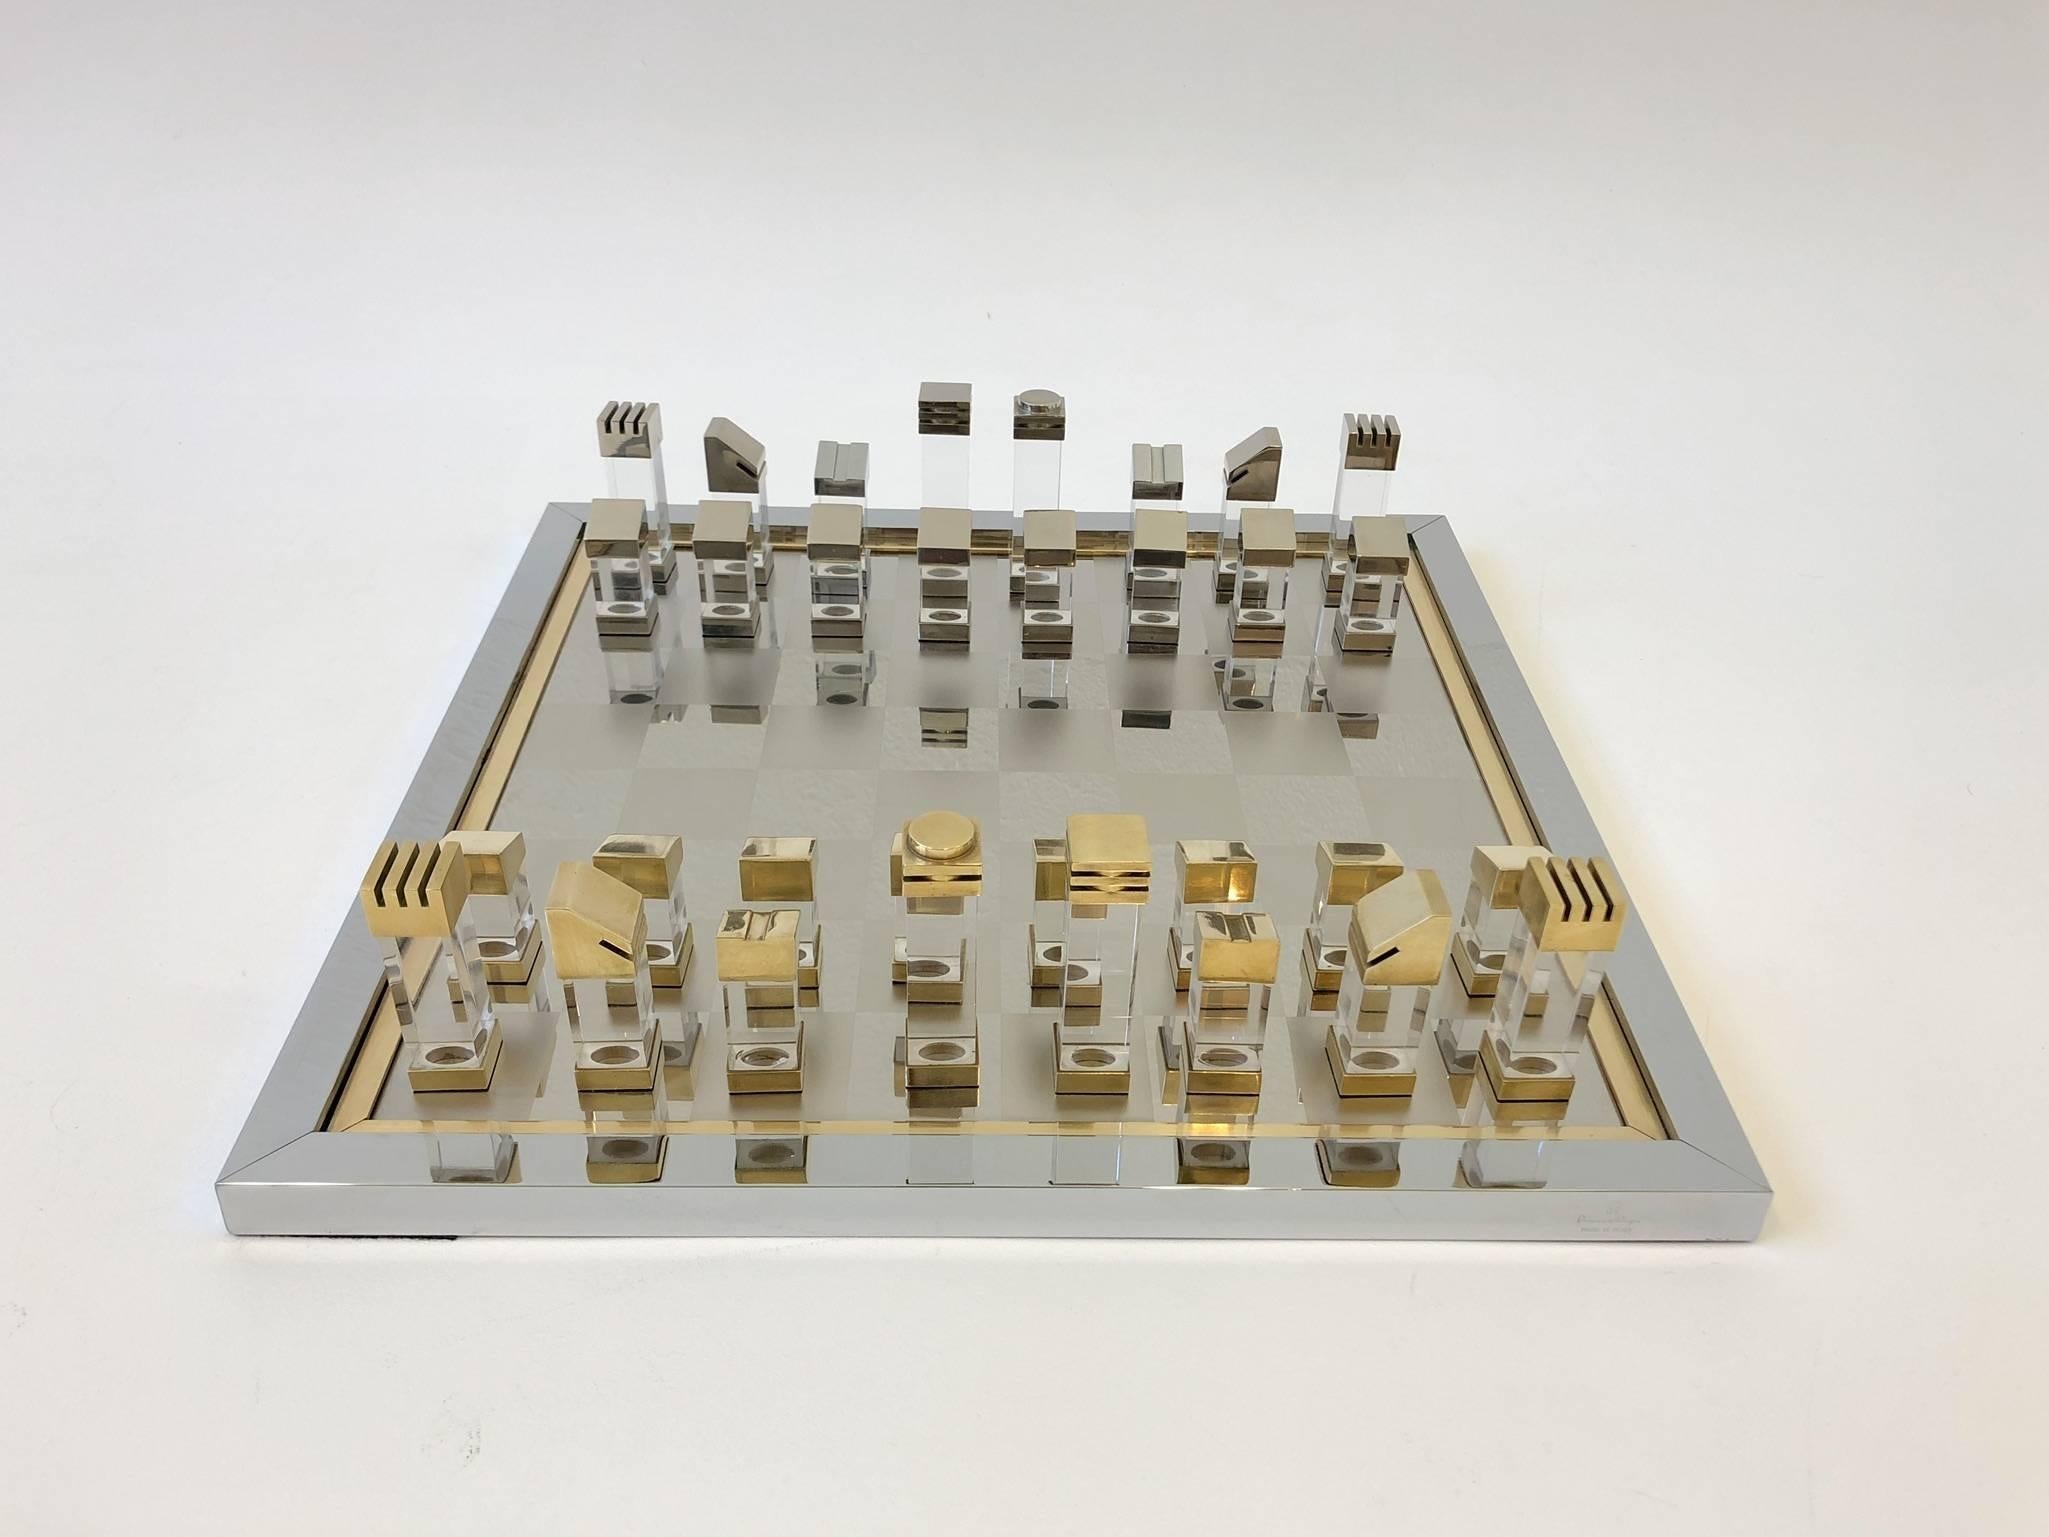 A spectacular 1970s Italian chess set by Romeo Rega. Constructed of polish chrome, brass and clear acrylic. The board is signed Romeo Rega made in Italy on the side (see detail photos).

Dimension: 
Board 16.75” wide 16.75” deep and .75